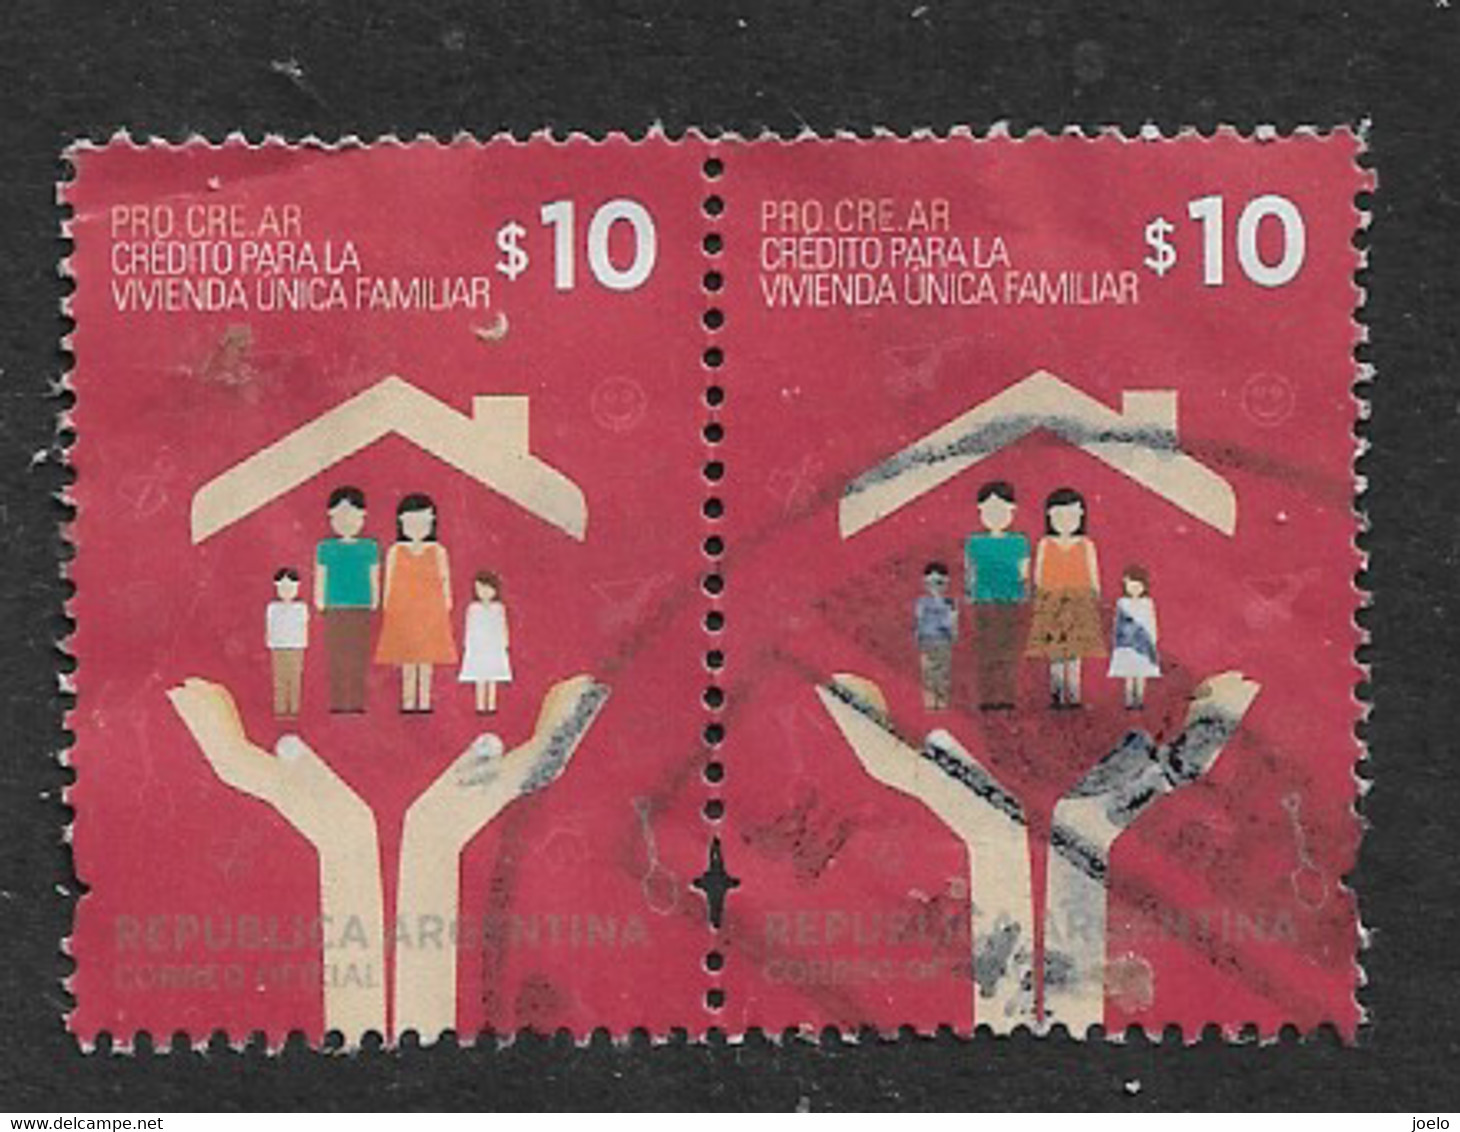 ARGENTINA 2014 CREDITS FOR HOUSING CAMPAIGN PAIR - Used Stamps